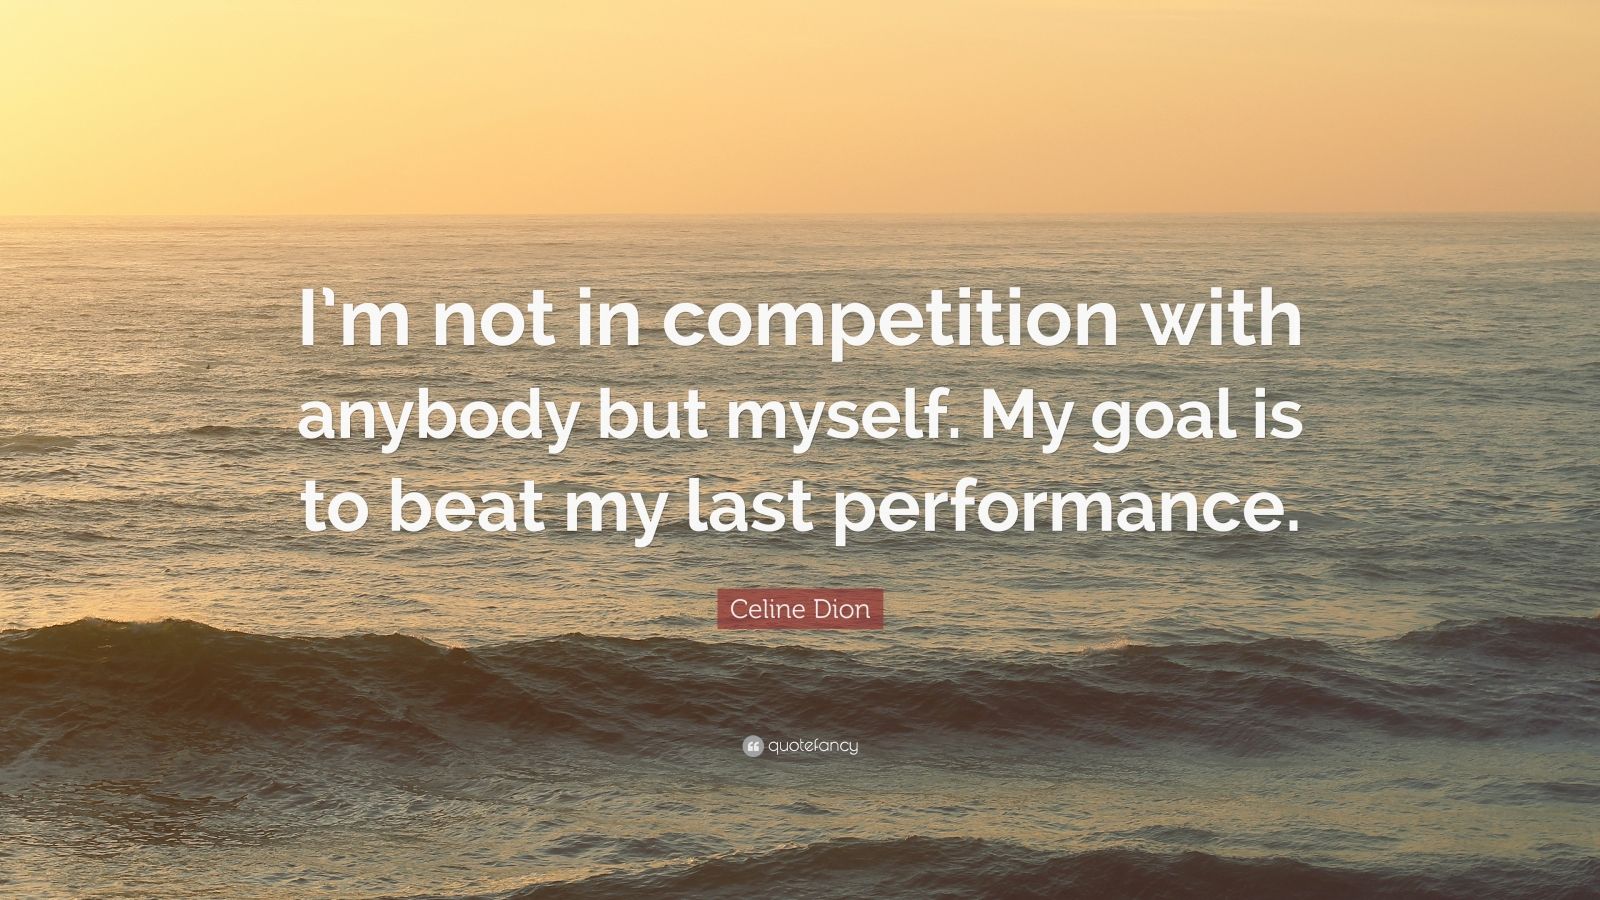 Celine Dion Quote: “I’m not in competition with anybody but myself. My